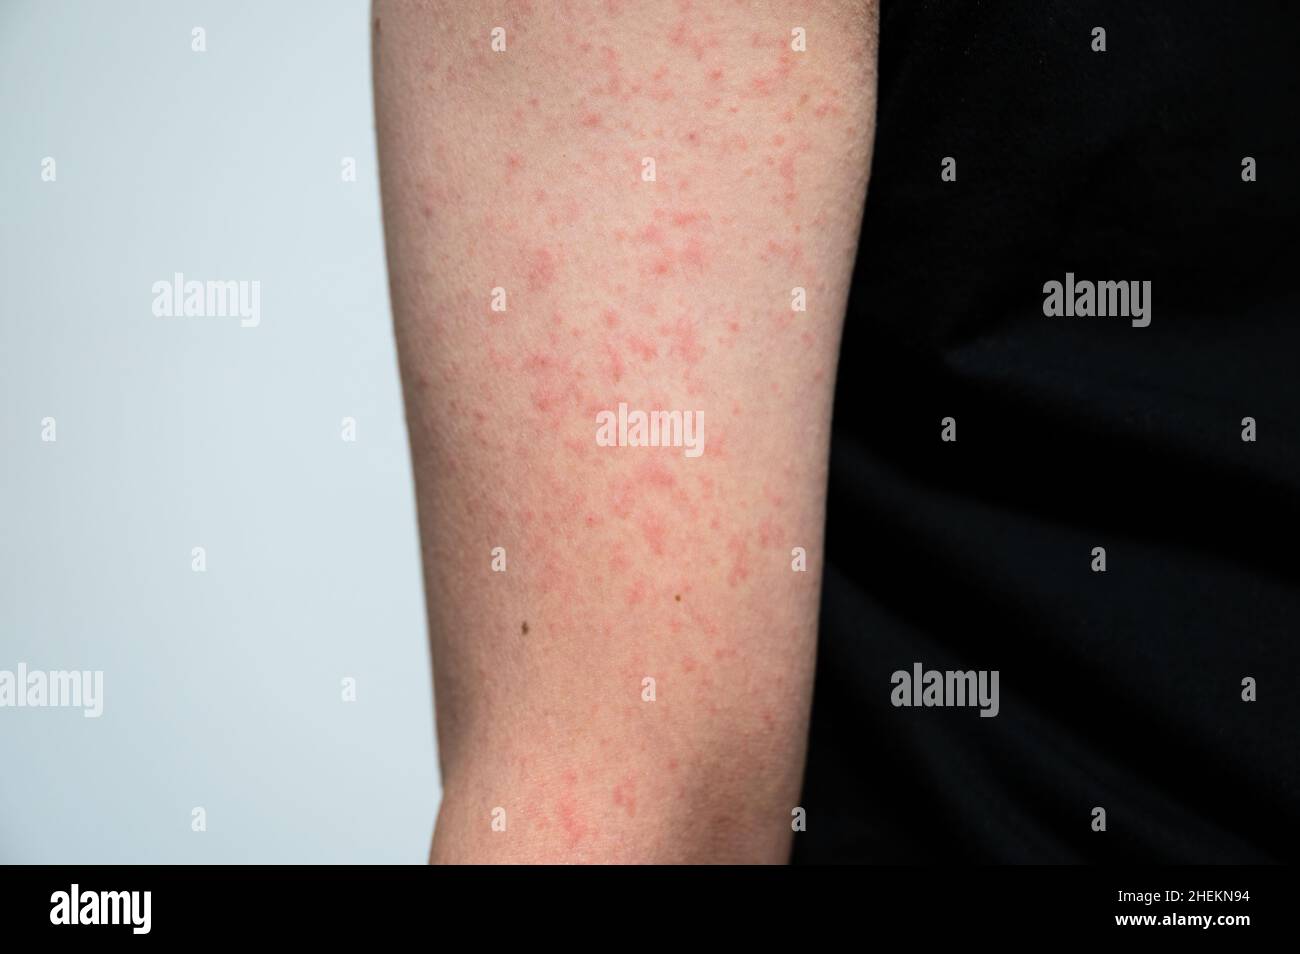 Dermatitis rash viral disease with immunodeficiency on arm of young adult asian, scratch with itch, Measles Virus, Viral Exanthem Stock Photo